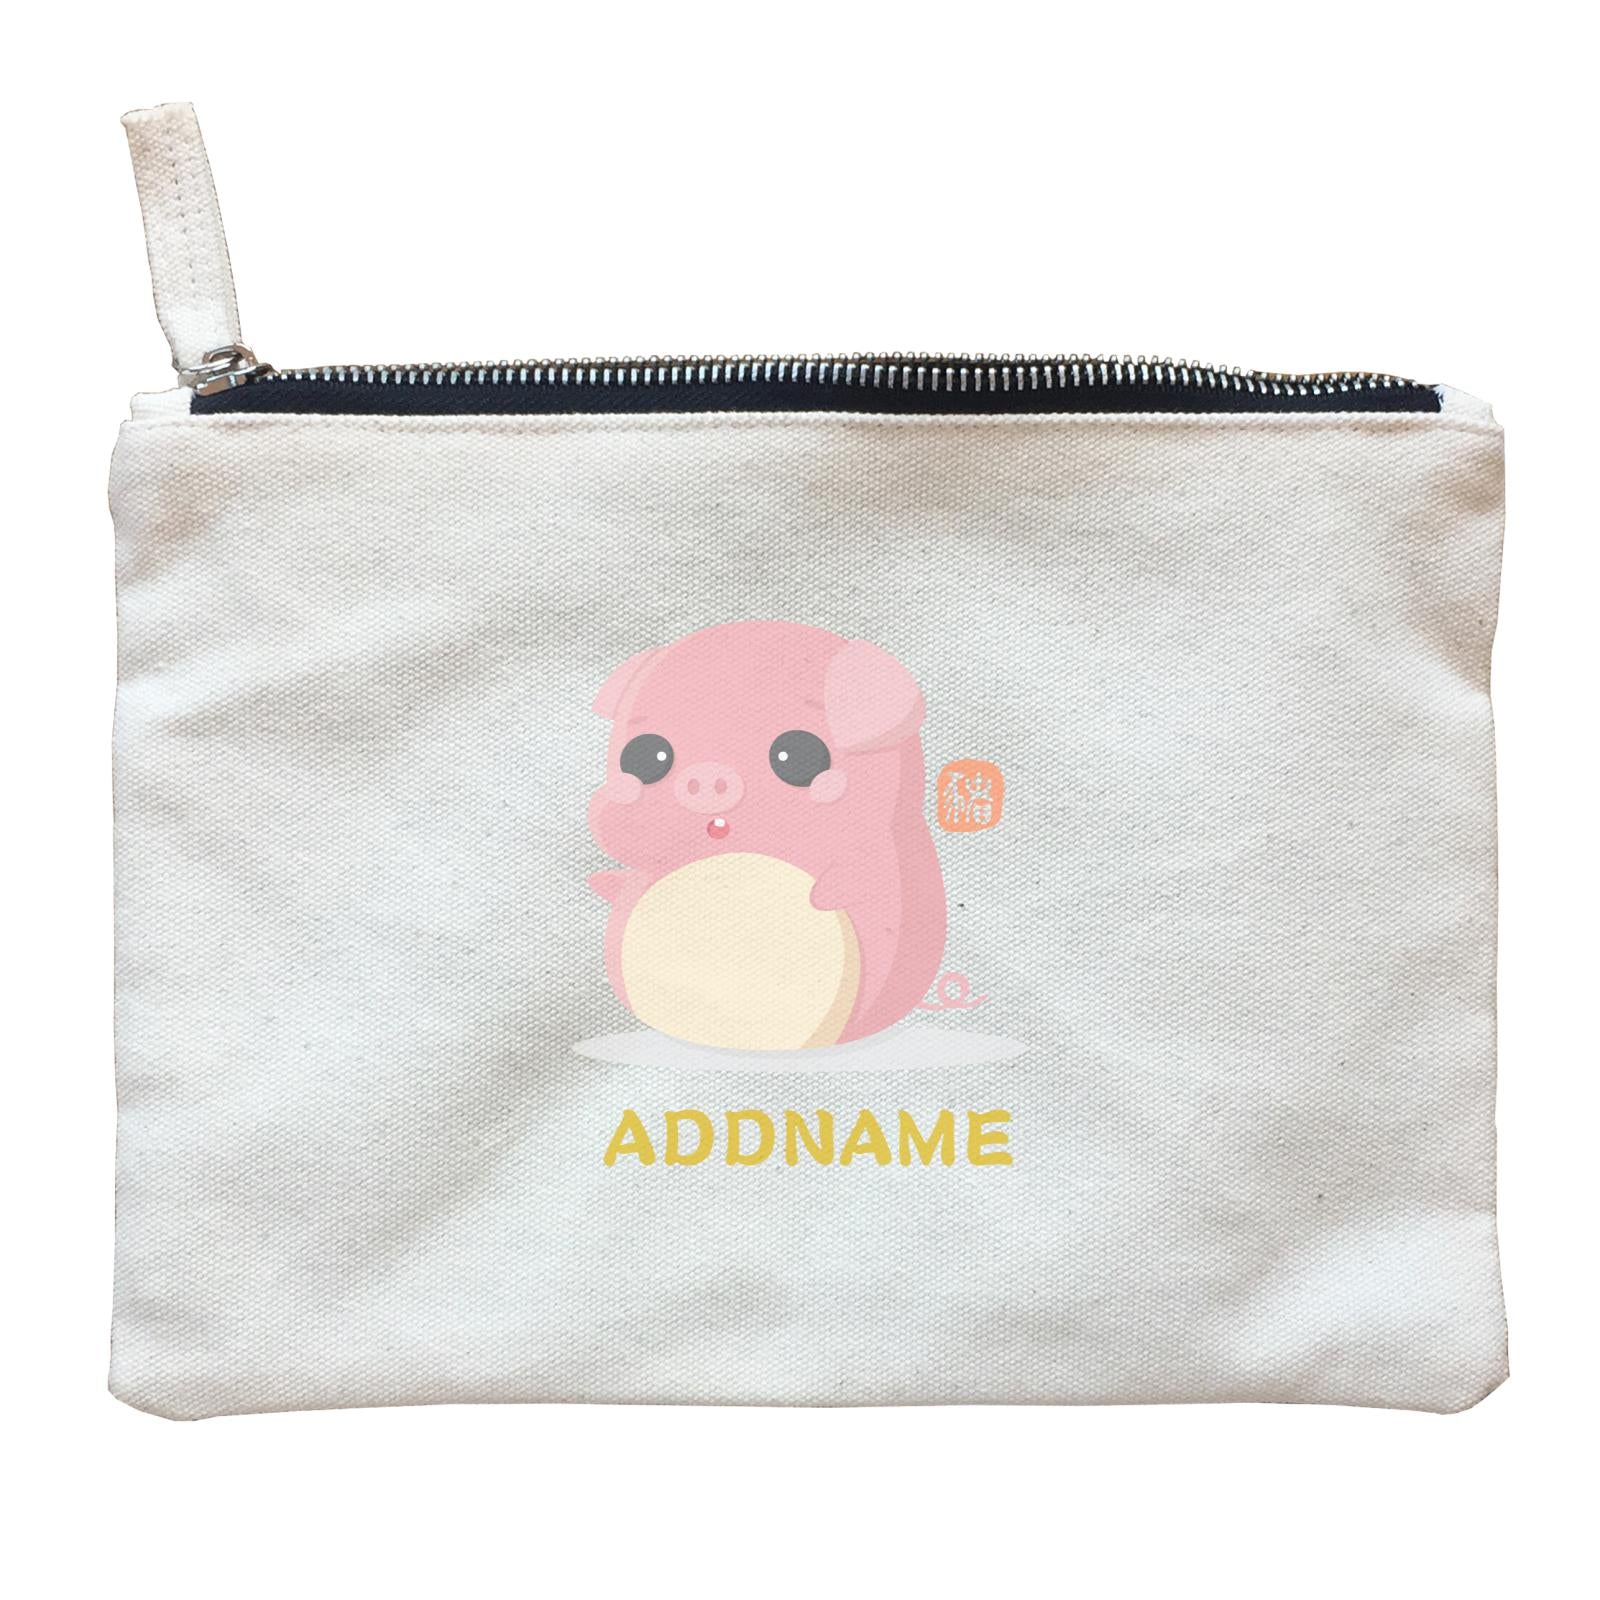 Chinese New Year Cute Twelve Zodiac Animals Pig Addname Zipper Pouch